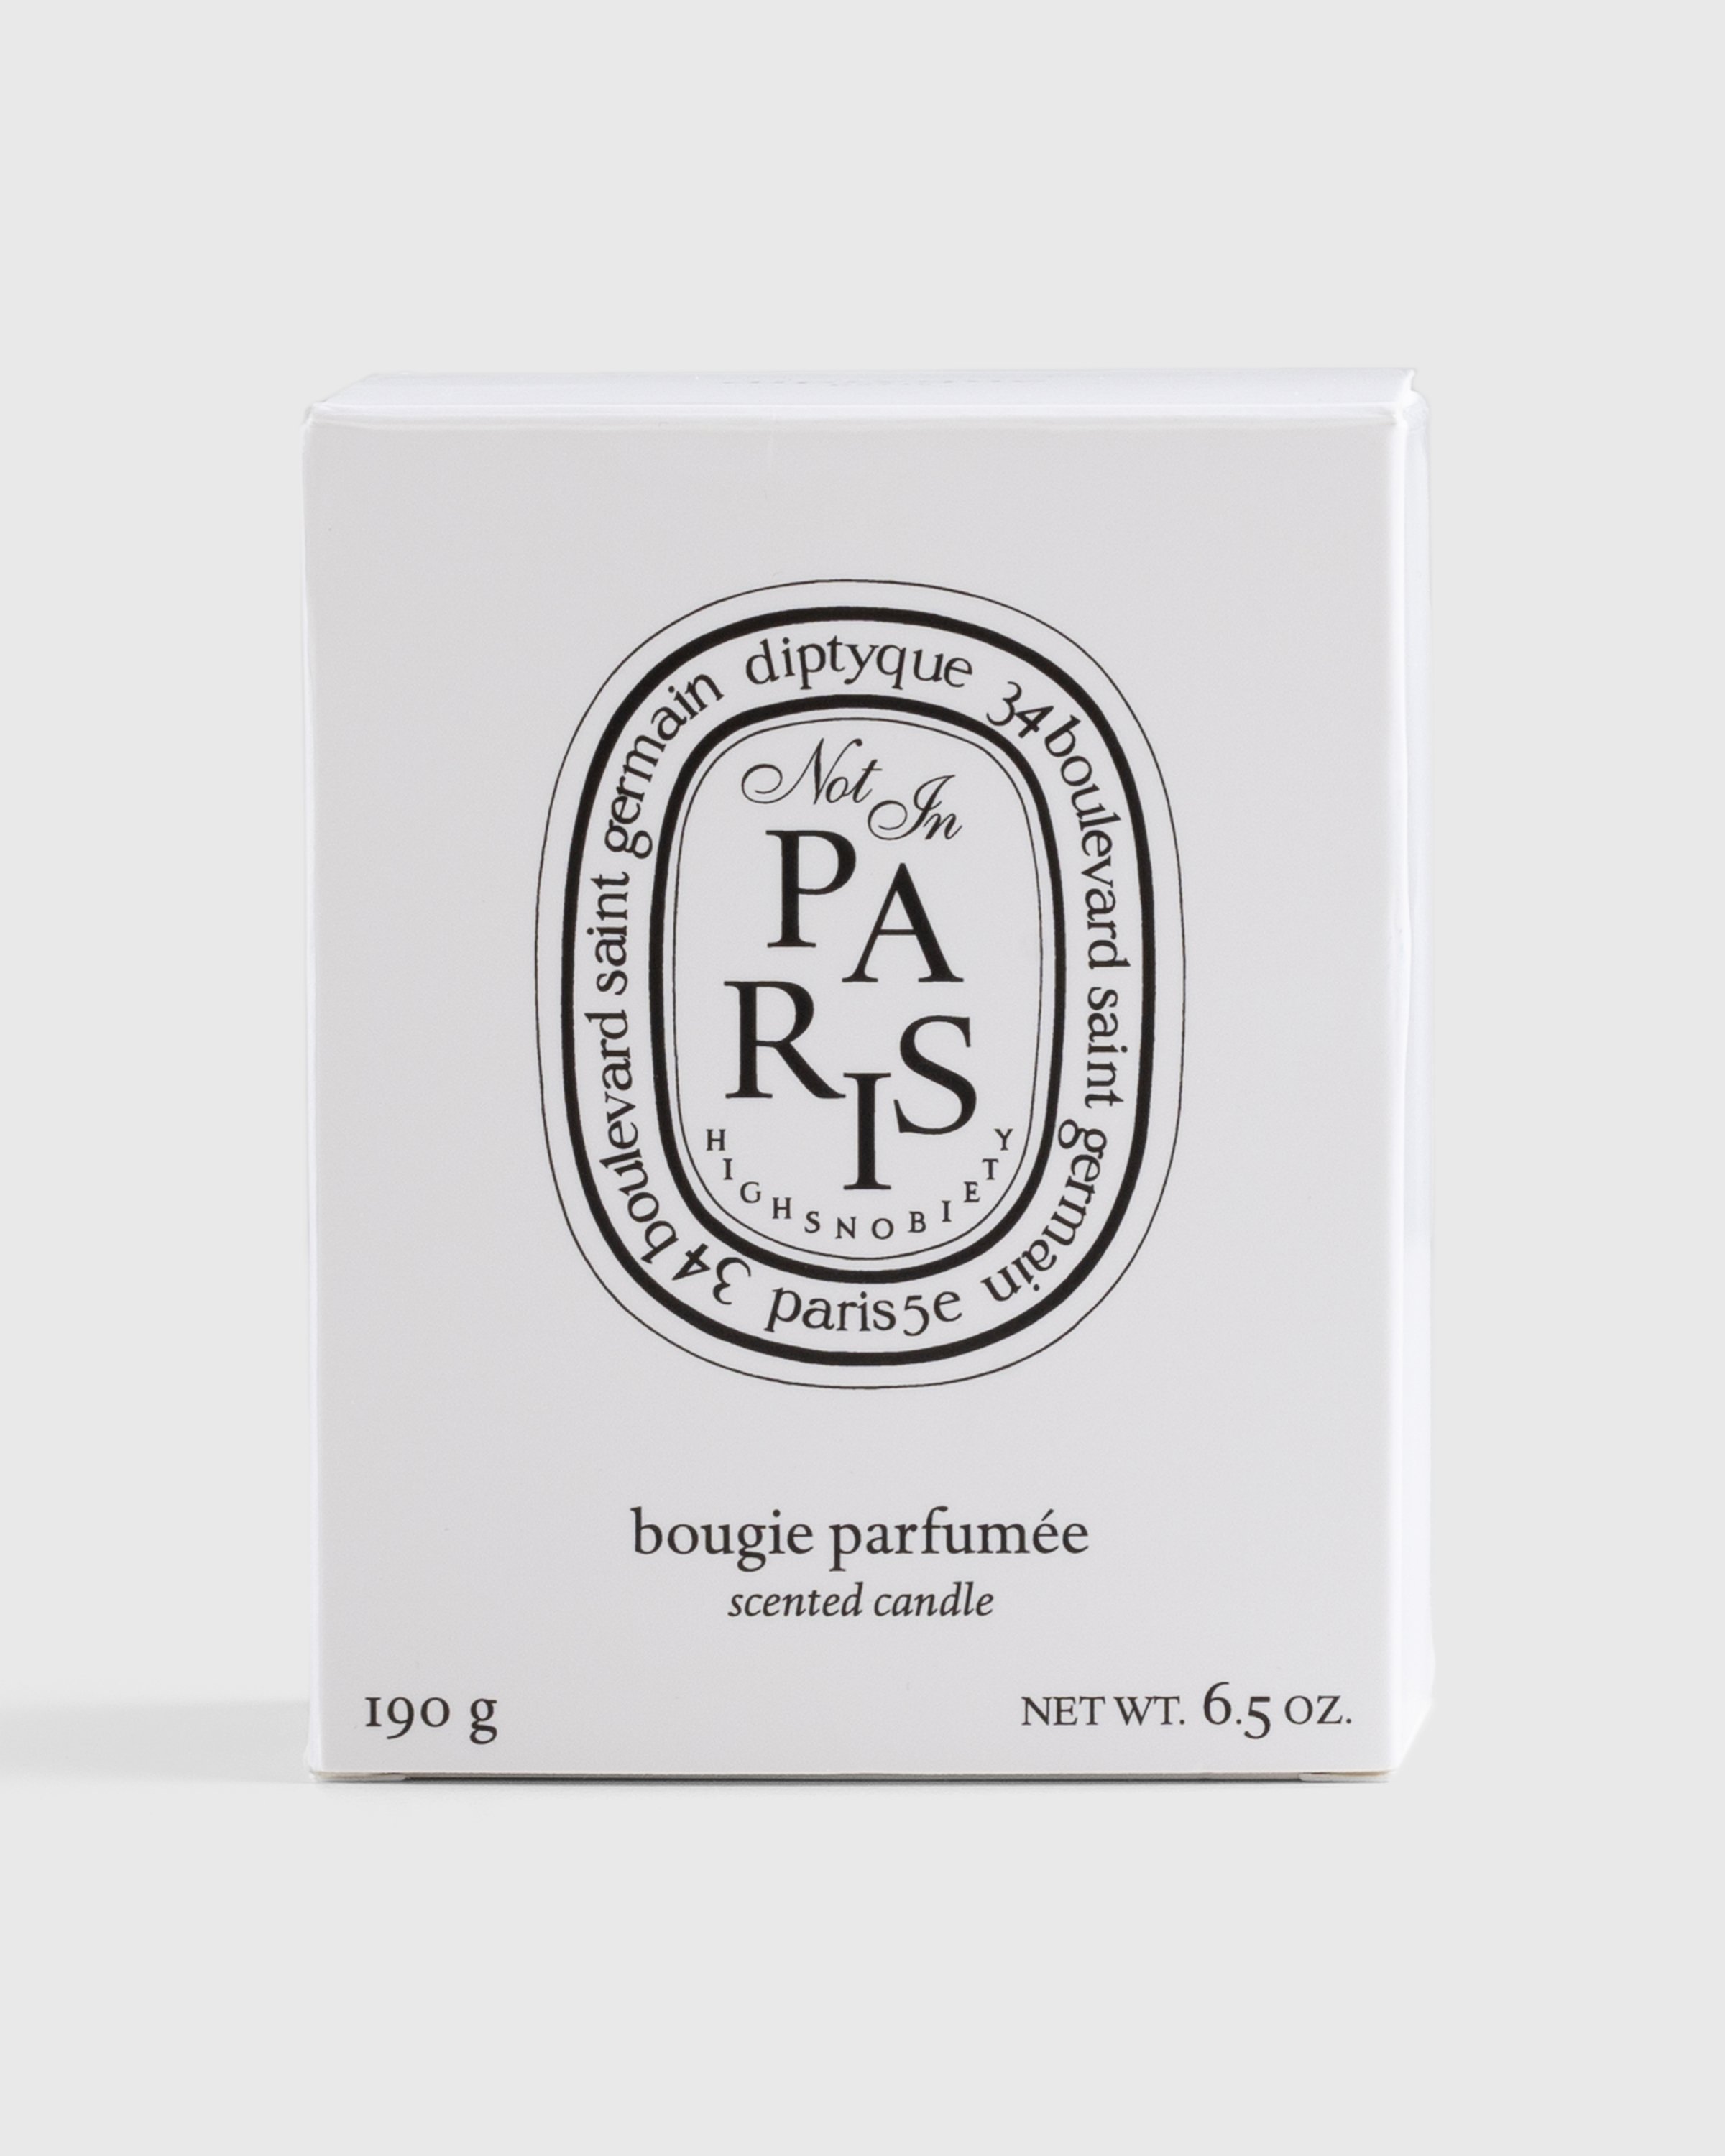 Diptyque x Highsnobiety - Not In Paris 4 Scented Candle White - Lifestyle - White - Image 3